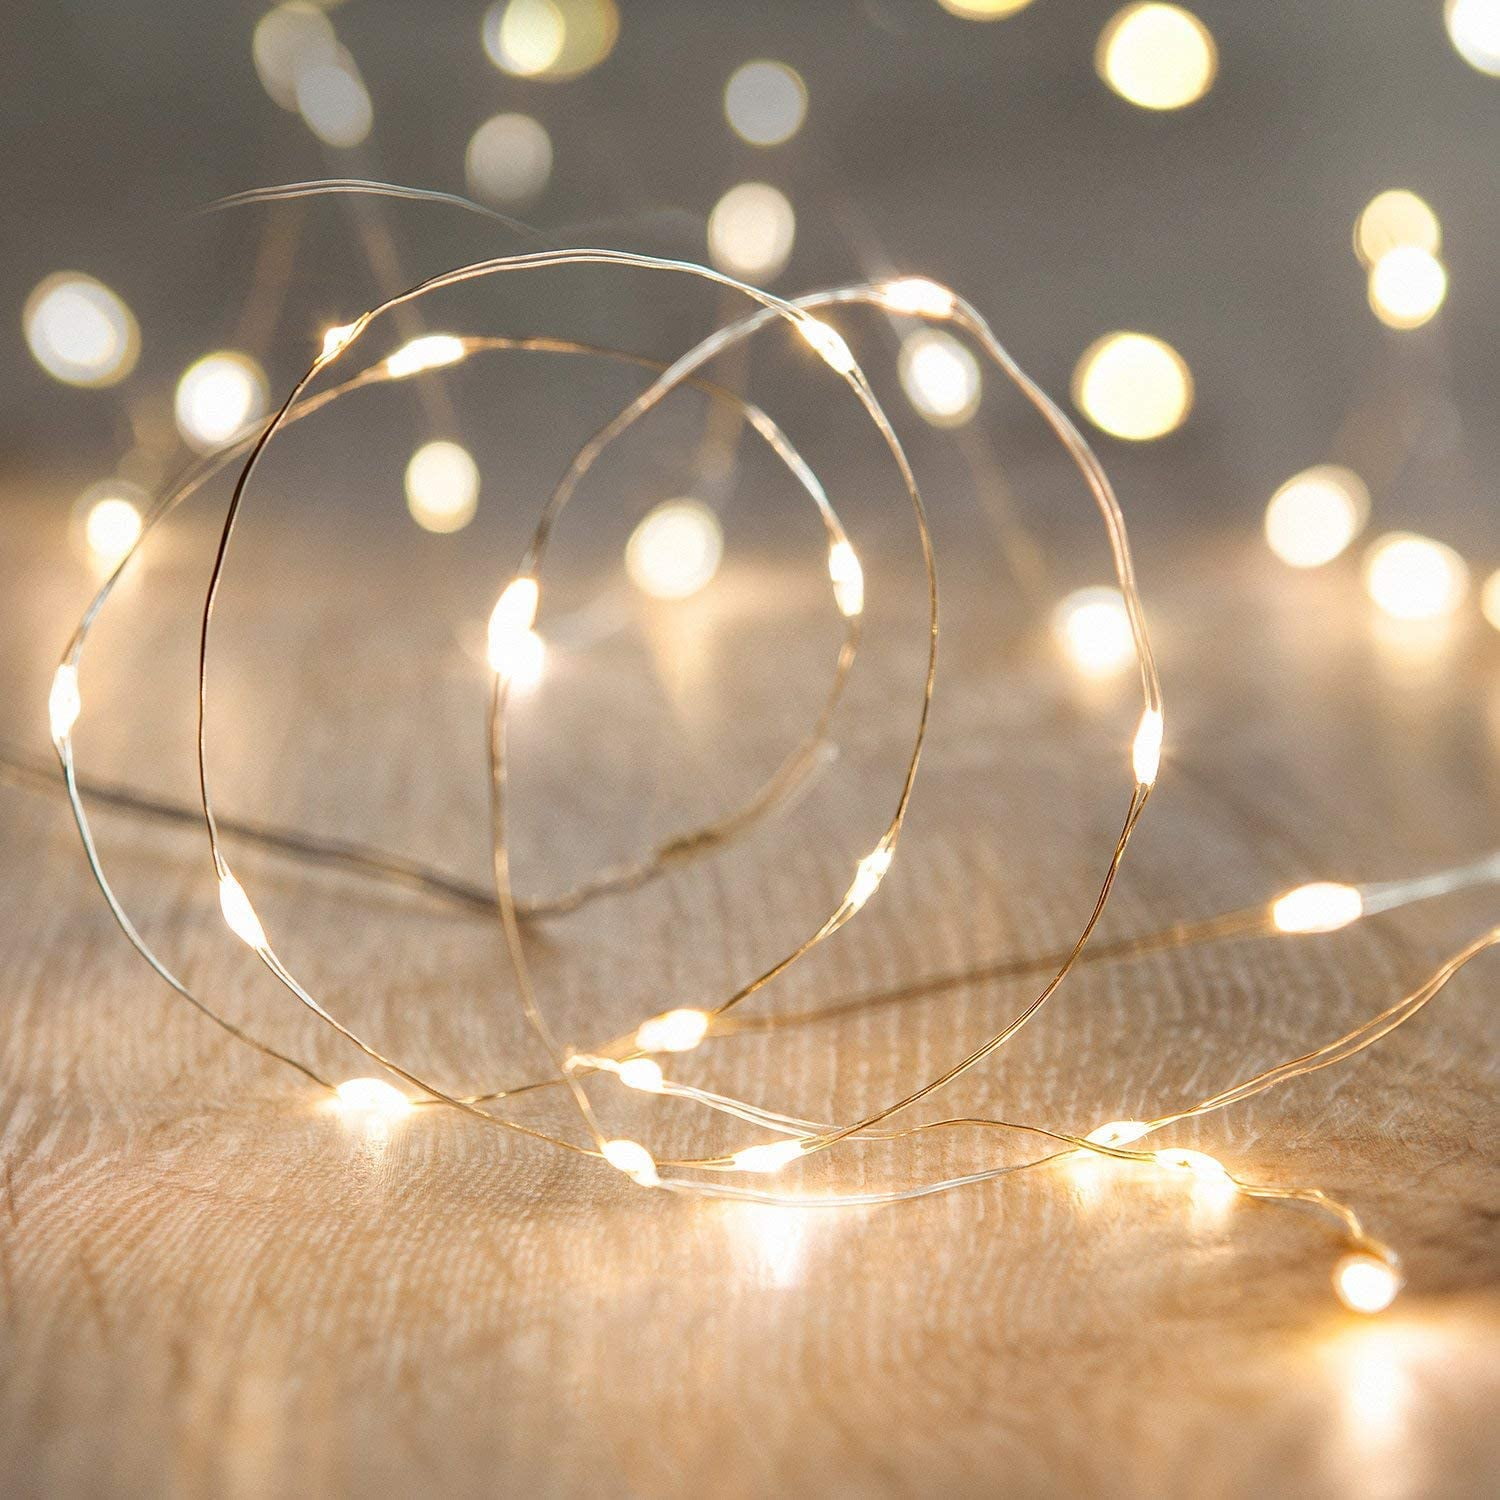 Metaku Fairy Lights Battery Operated 16.4Ft/5M 50 LED String Lights Twinkle C... 